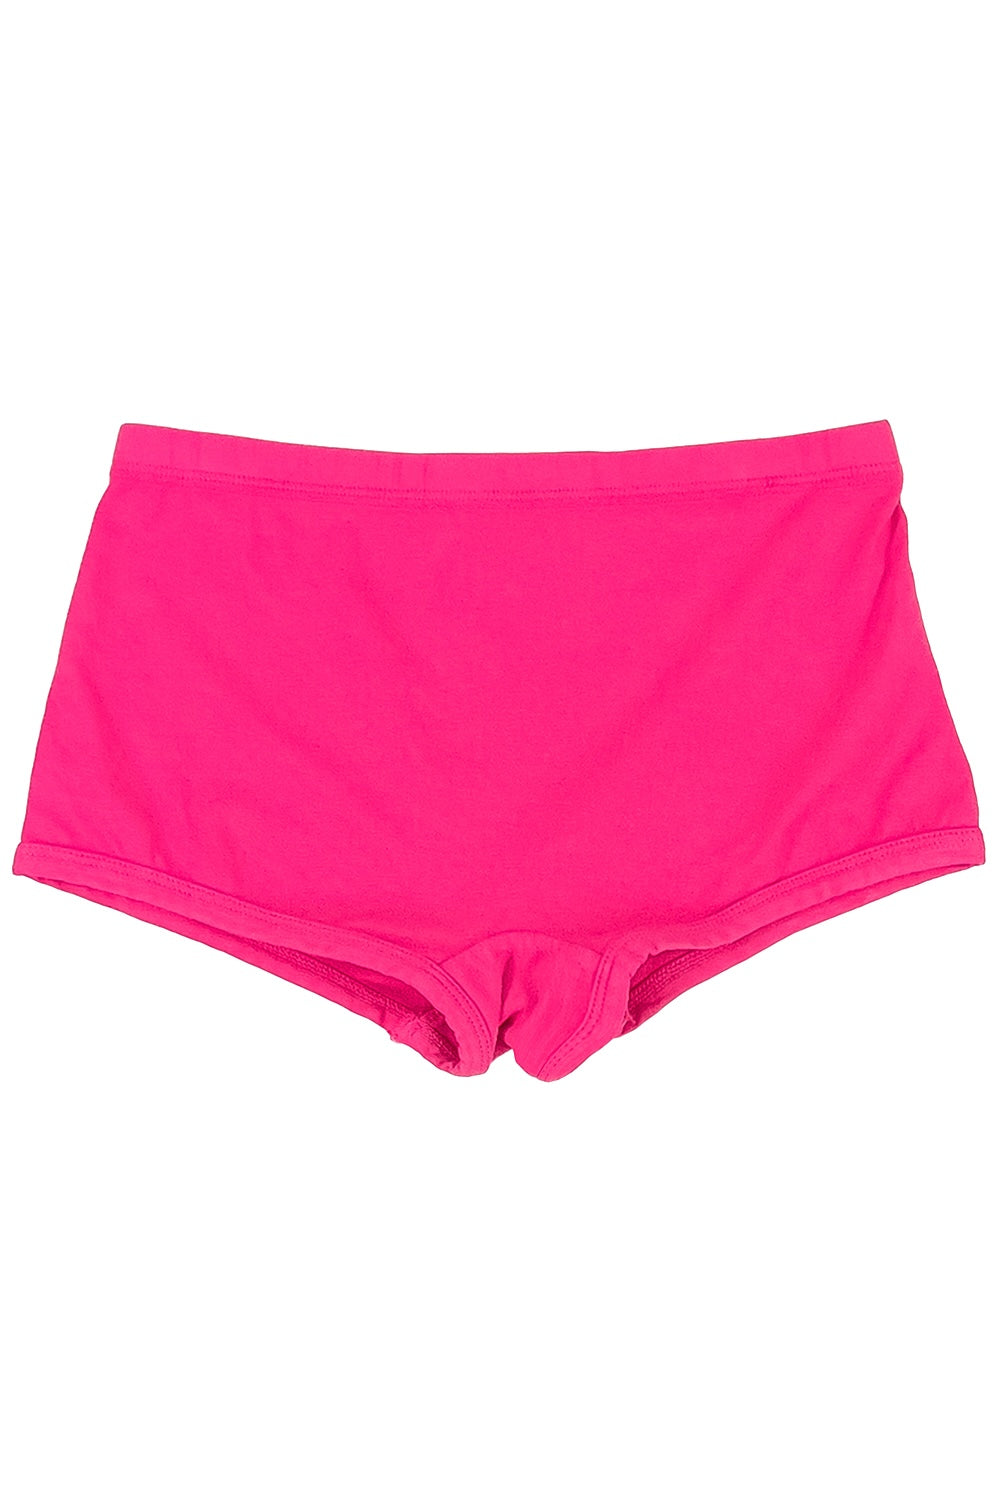 wholesale free shipping modal panties for lady hot stock cheap